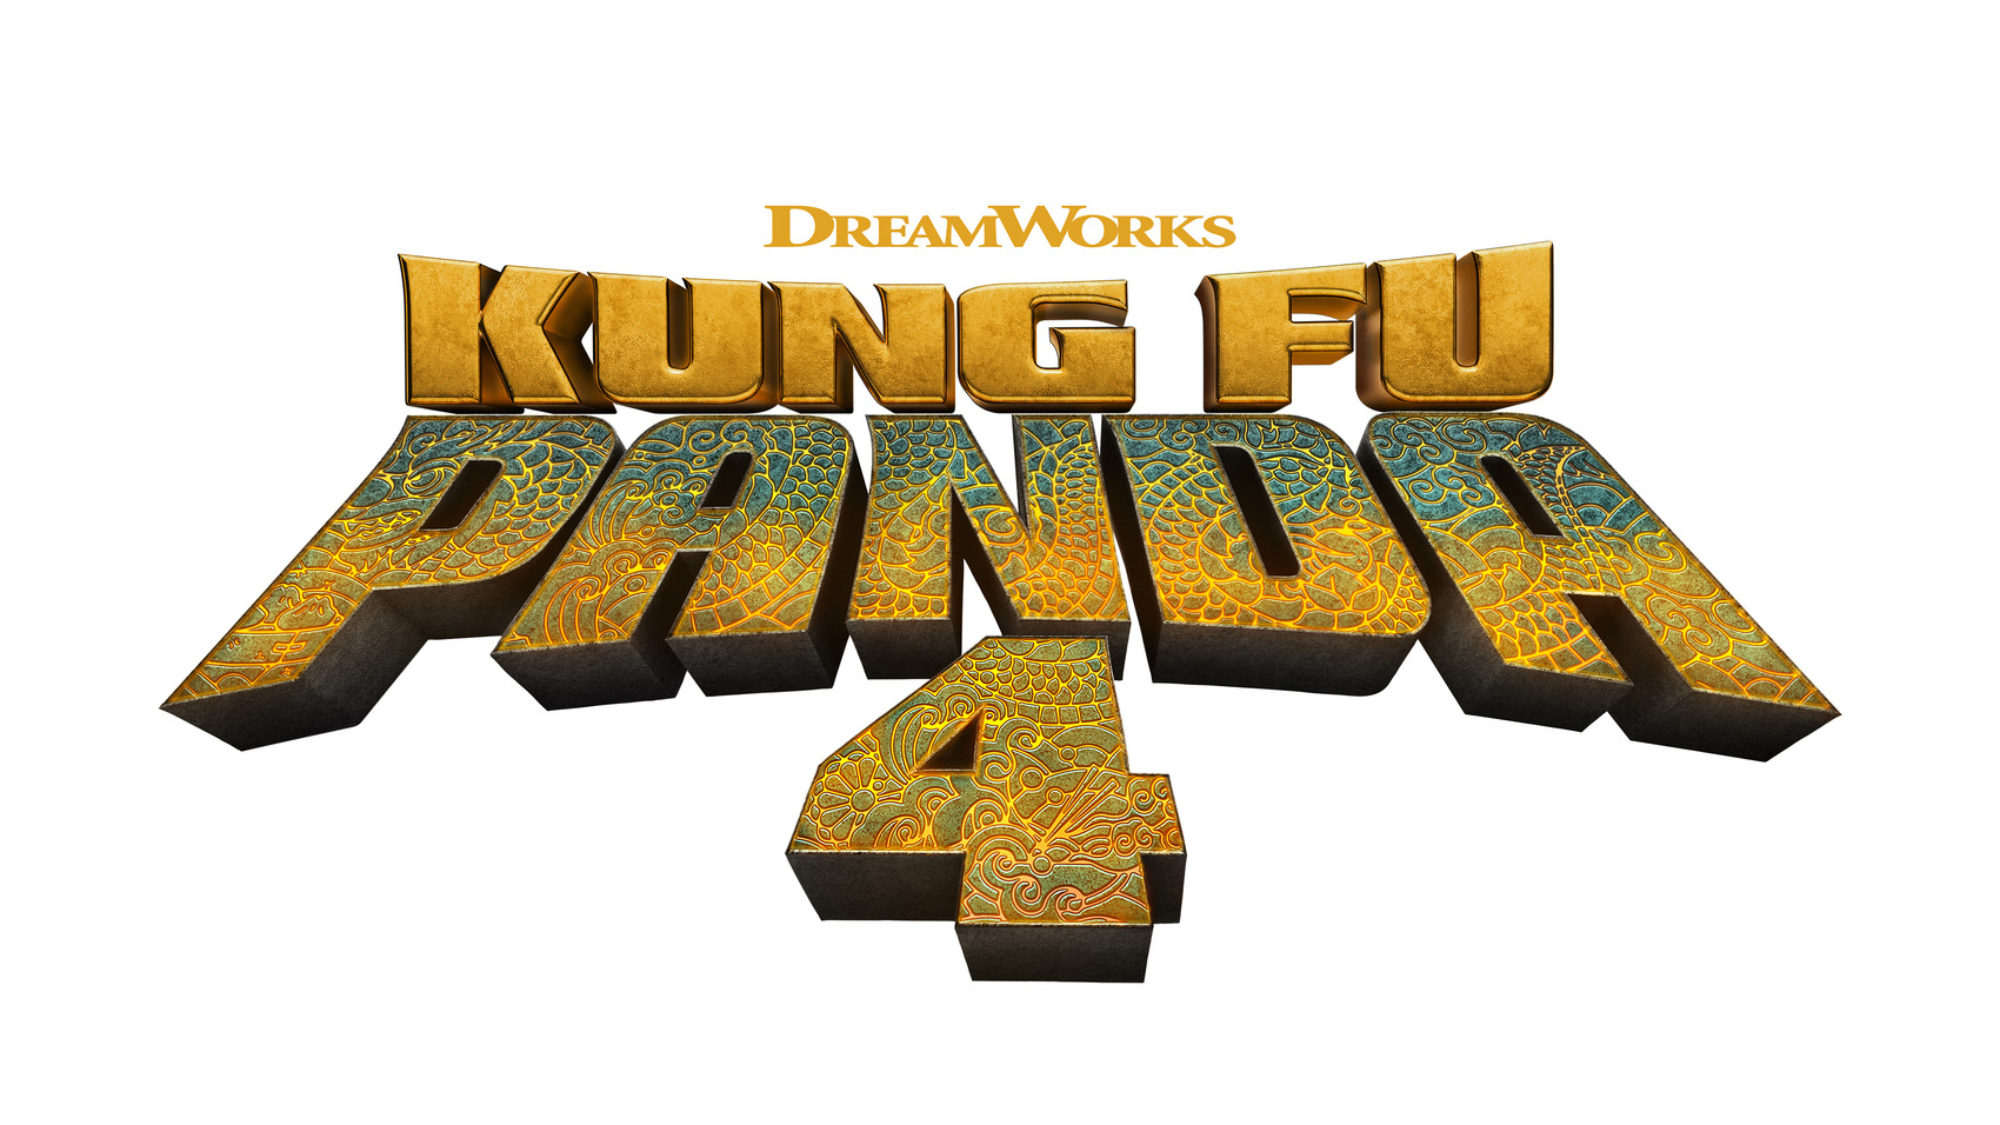 Kung Fu Panda 4 Trailer & Poster Have Dropped, See Them Both Here